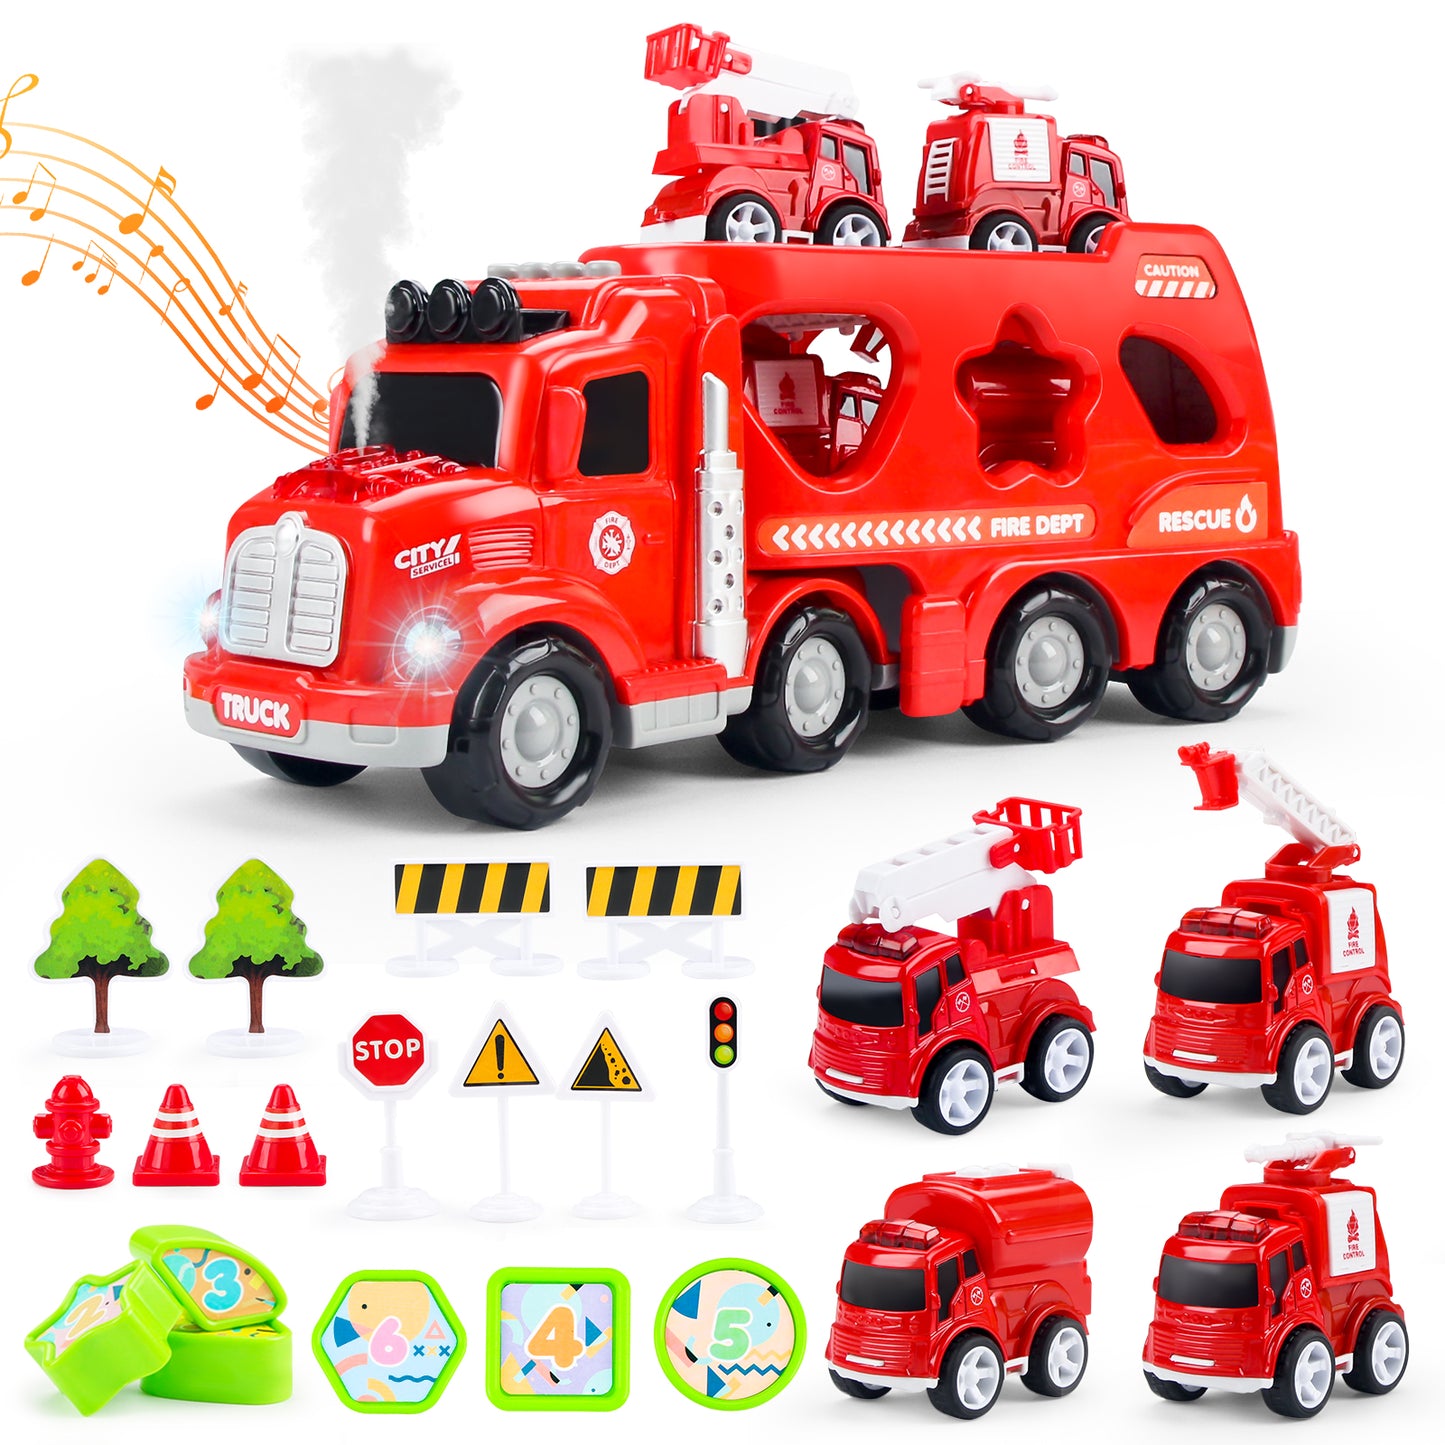 Joyfia Fire Truck Toys for 3-8 Year Old Boys, 5 in 1 Transport Truck Carrier Toy with Light and Sound & Vapor Spray, Mini Fire Rescue Truck Toy, Christmas Birthday Gifts for Kids